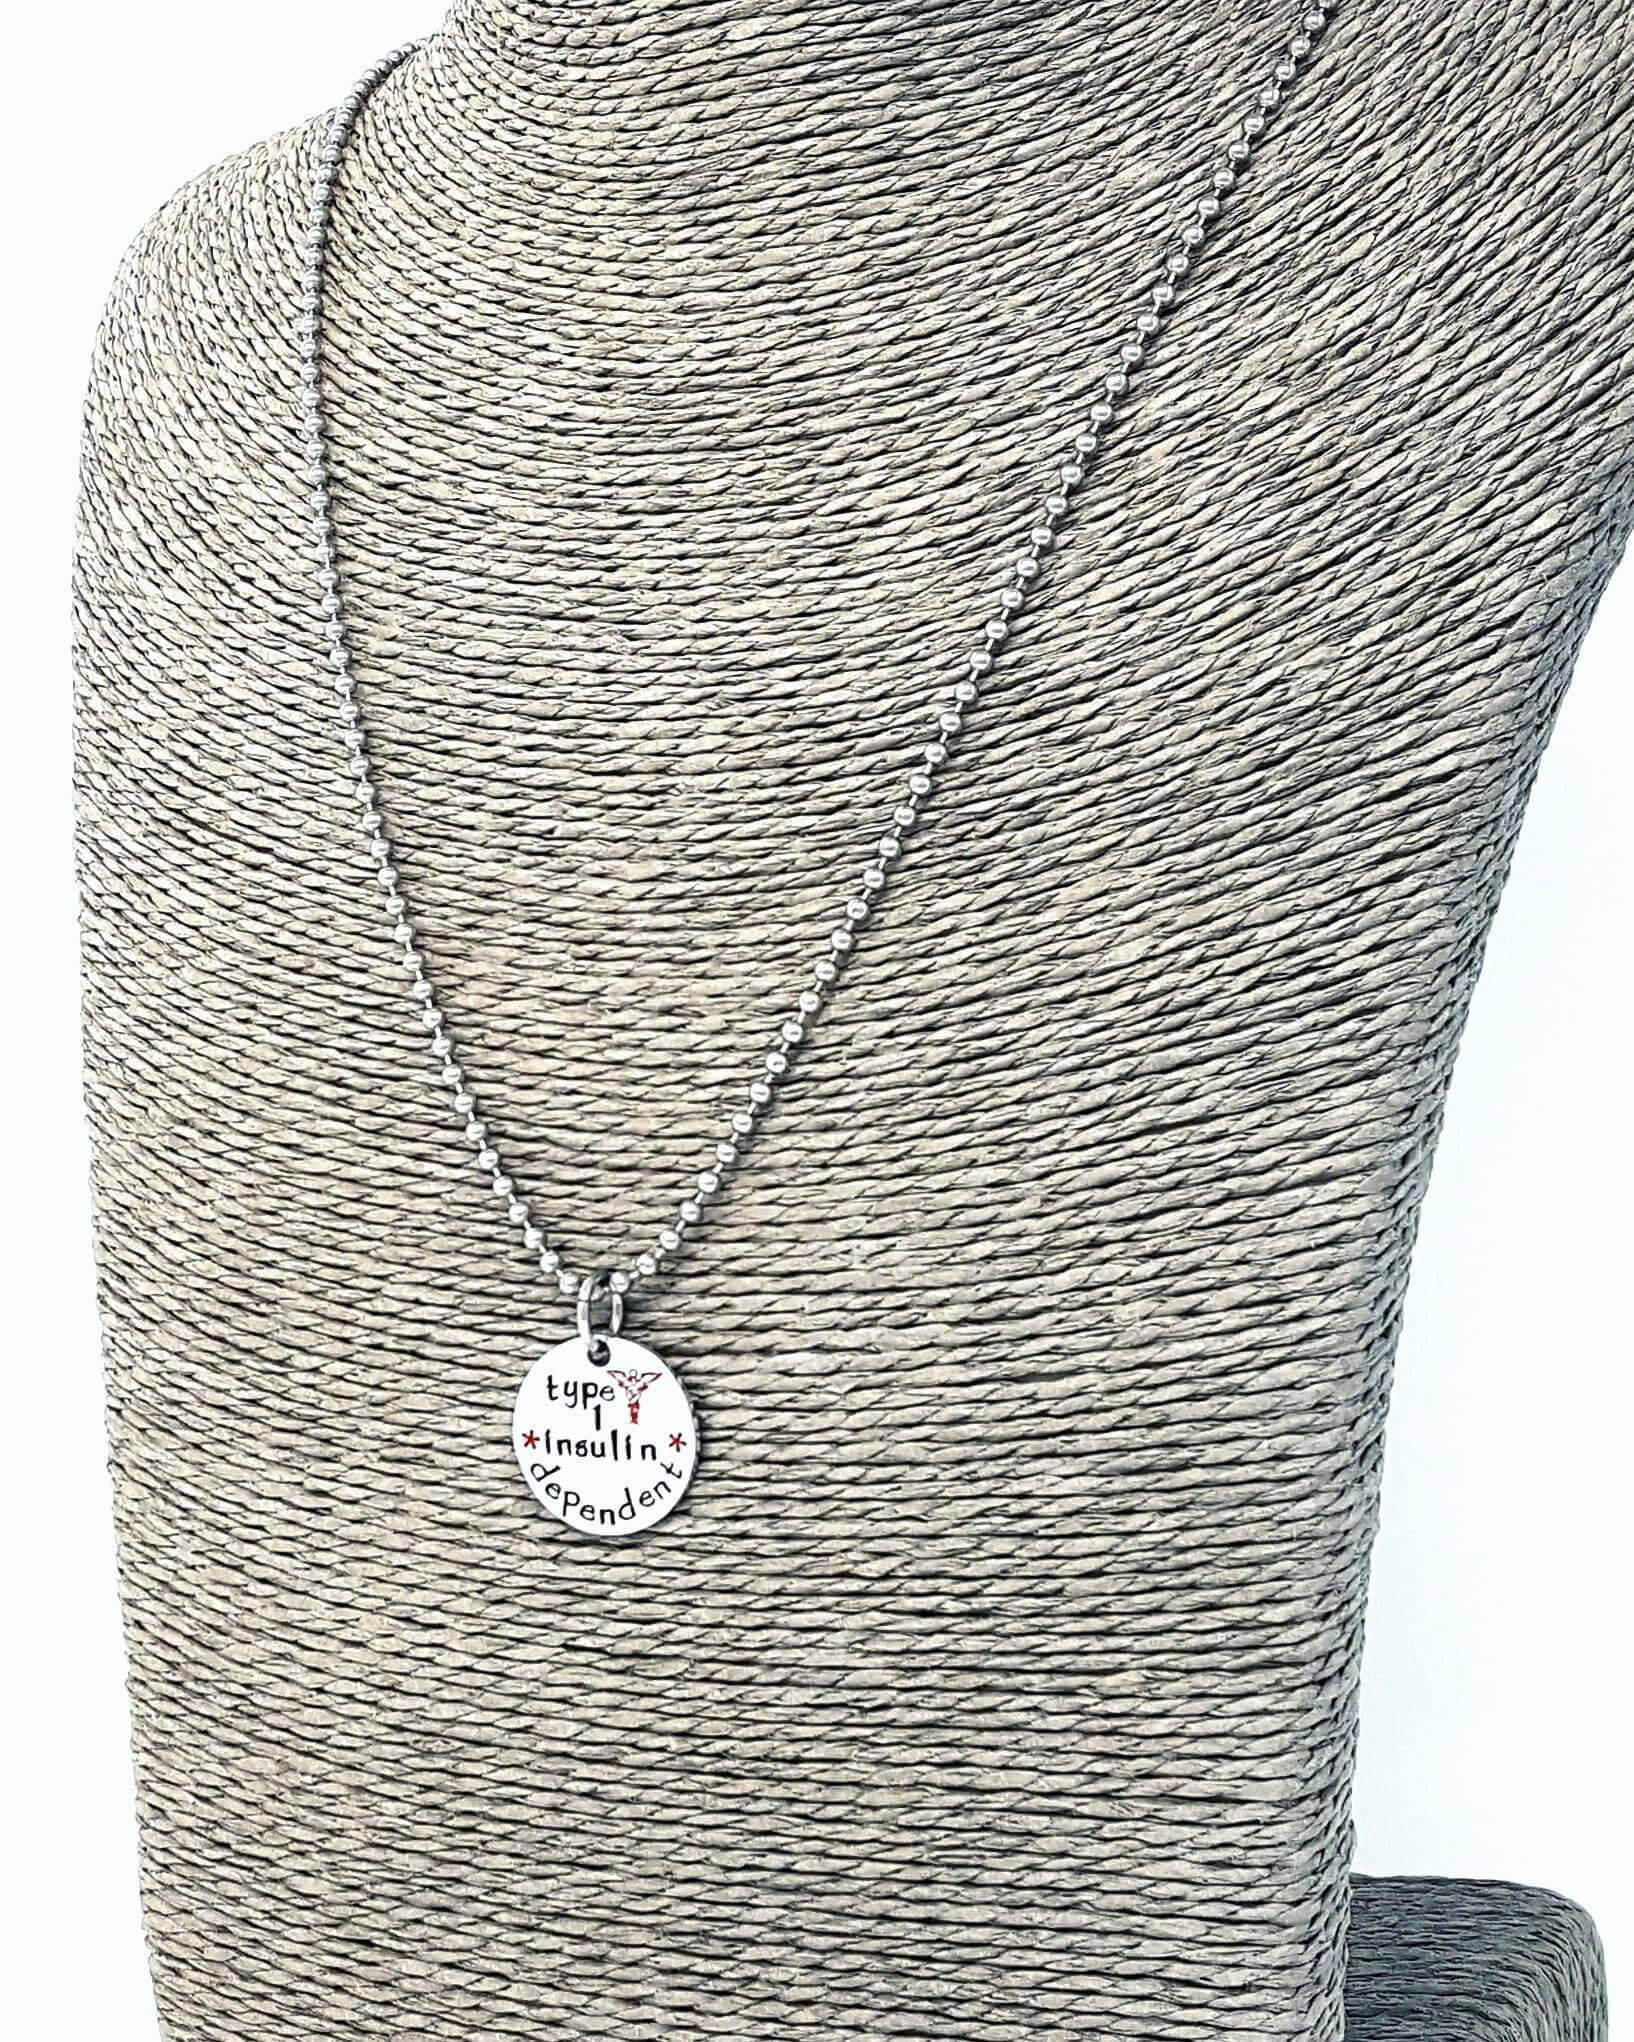 Type 1 Diabetes Alert Necklace, Medical Alert, Emergency Medical Necklace, Insulin Dependent, Necklaces, HandmadeLoveStories, HandmadeLoveStories , [Handmade_Love_Stories], [Hand_Stamped_Jewelry], [Etsy_Stamped_Jewelry], [Etsy_Jewelry]